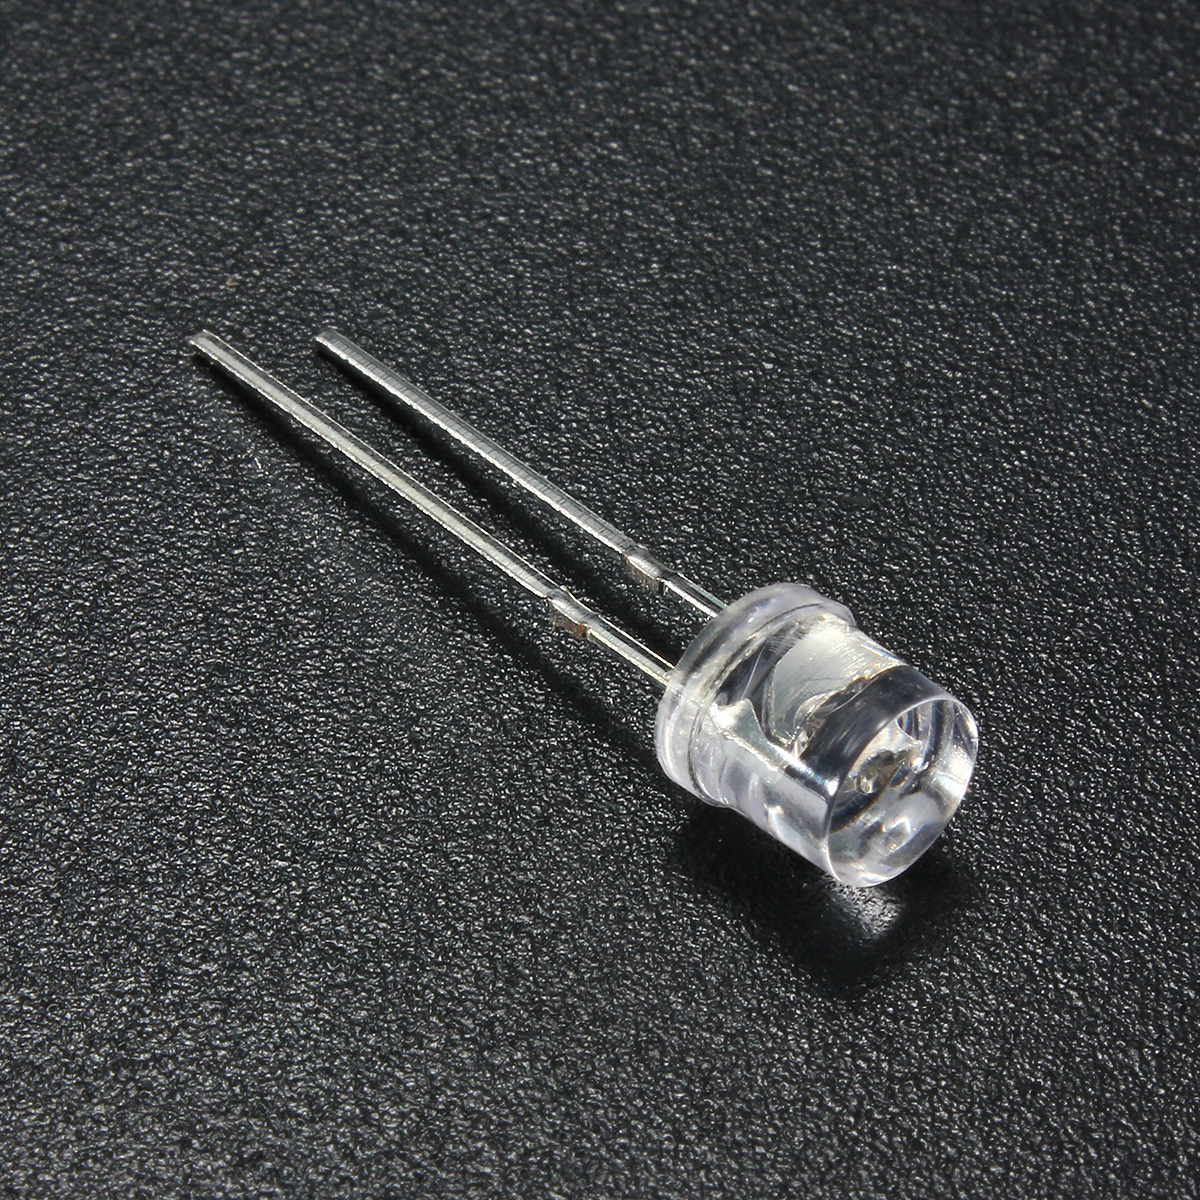 10pcs-5mm-5-Color-Water-Clear-Flat-LED-Diodes-Assortment-DIY-Light-1076710